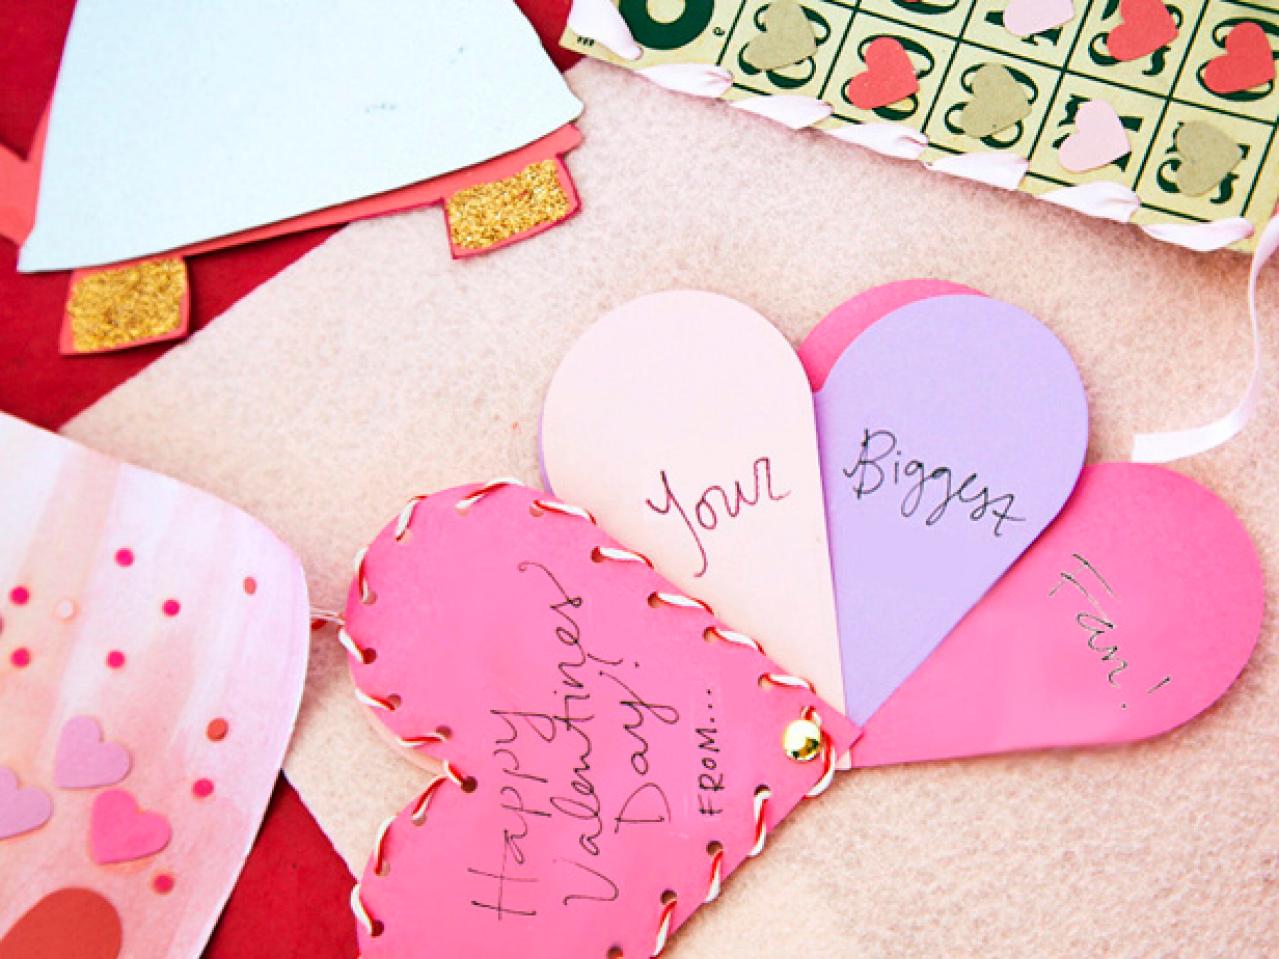 Handmade Valentine's Day Cards | Easy Crafts and Homemade Decorating & Gift Ideas | HGTV1279 x 959